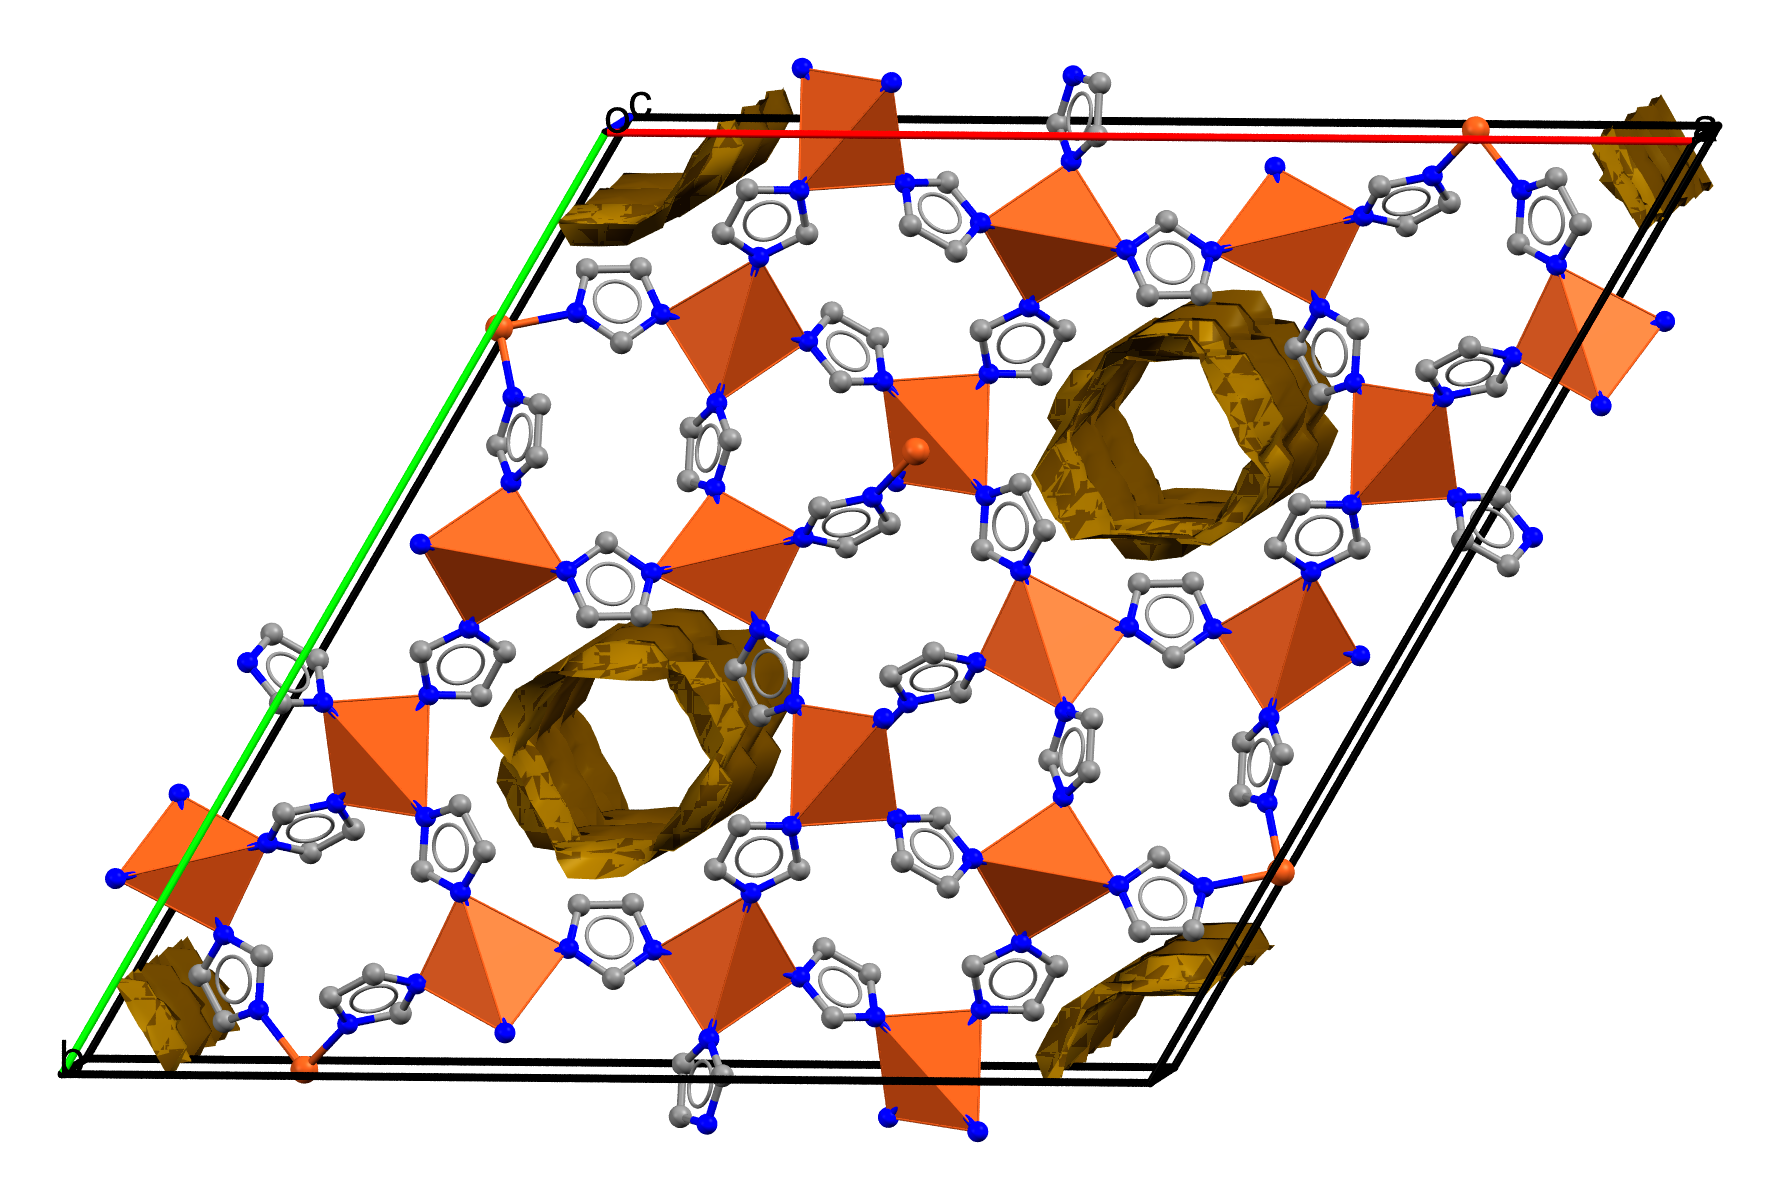 Polyhedral representation of a polymorph of a copper zeolitic imidazolate framework